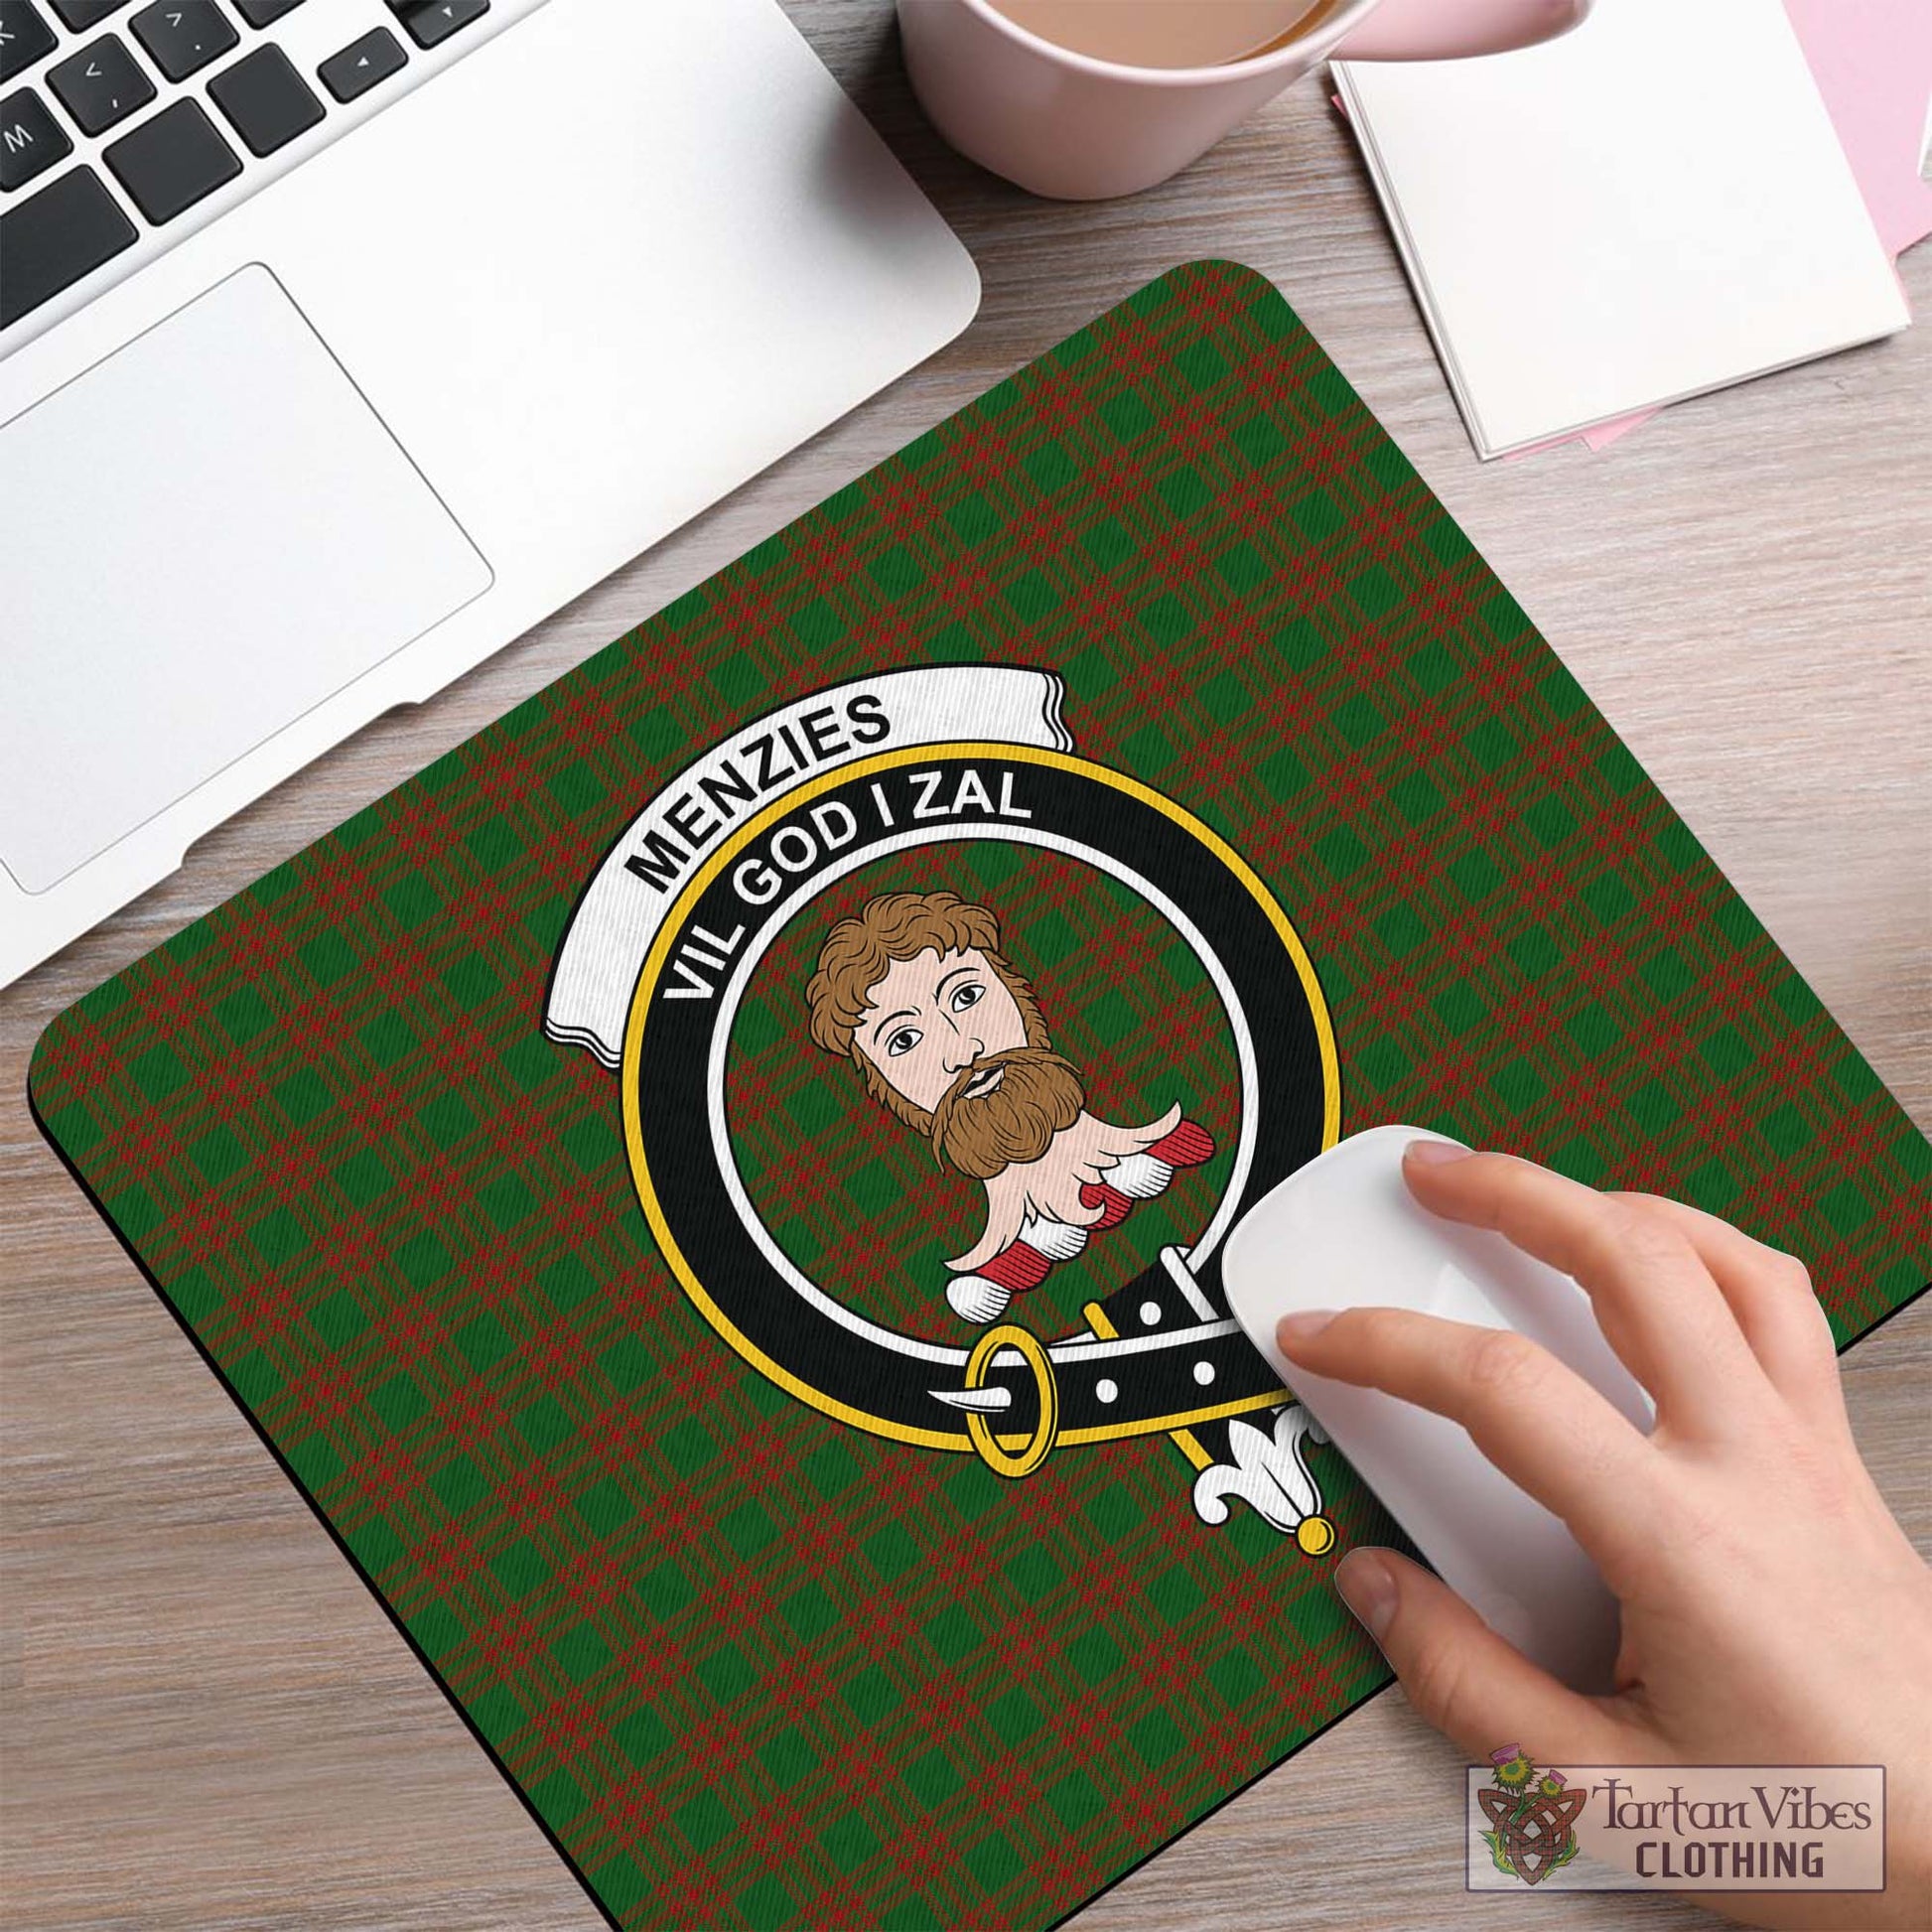 Tartan Vibes Clothing Menzies Tartan Mouse Pad with Family Crest